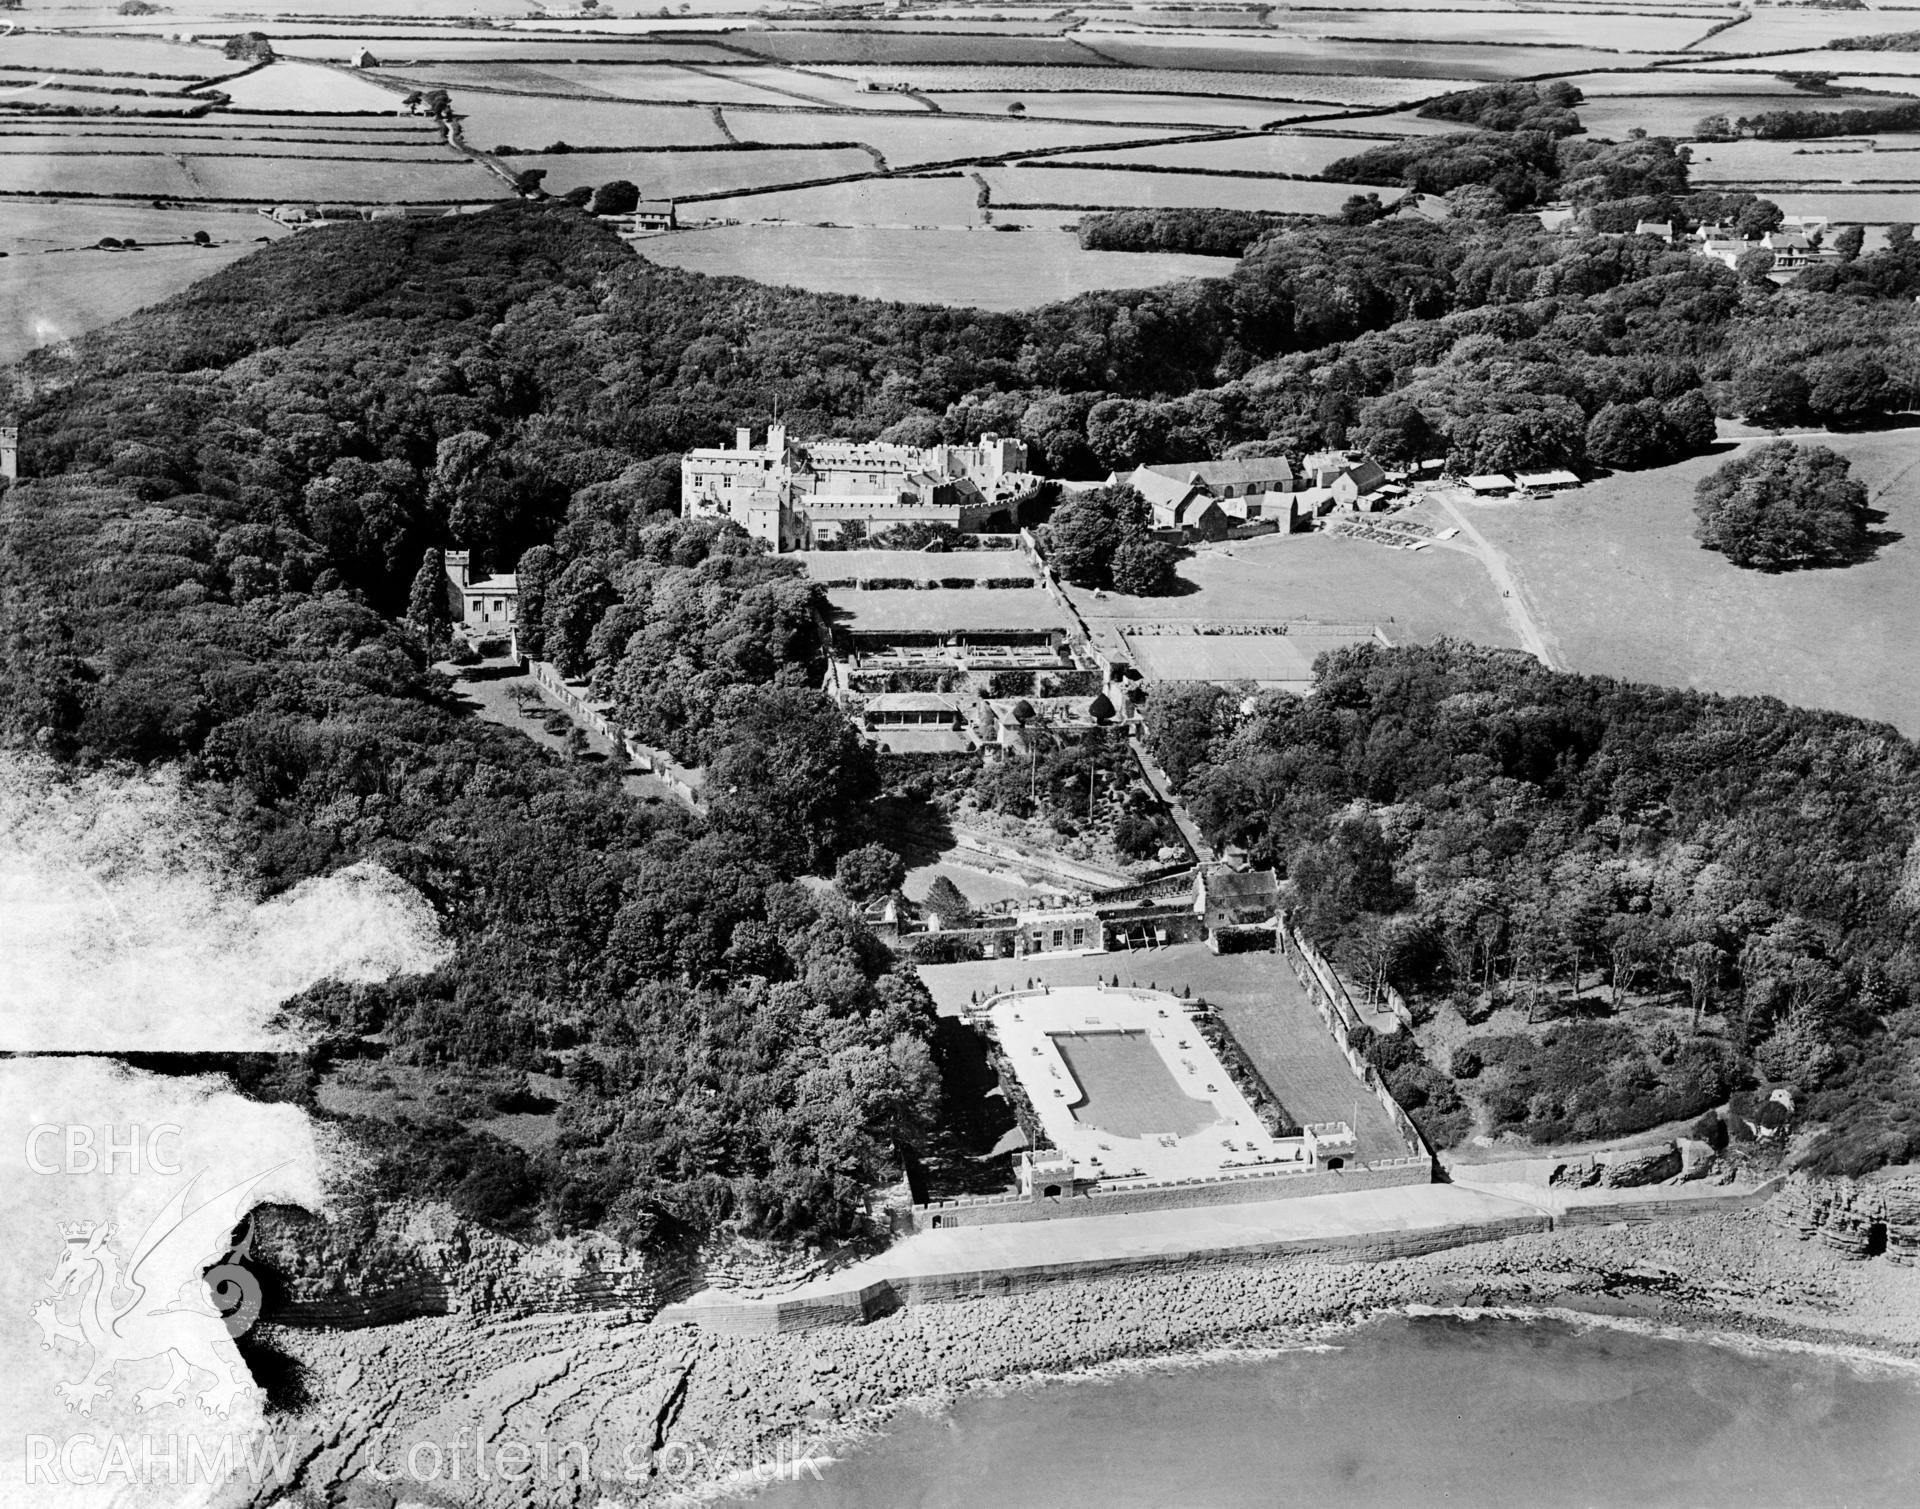 View of St Donat's Castle, commissioned by W R Hearst. Oblique aerial photograph, 5?x4? BW glass plate.